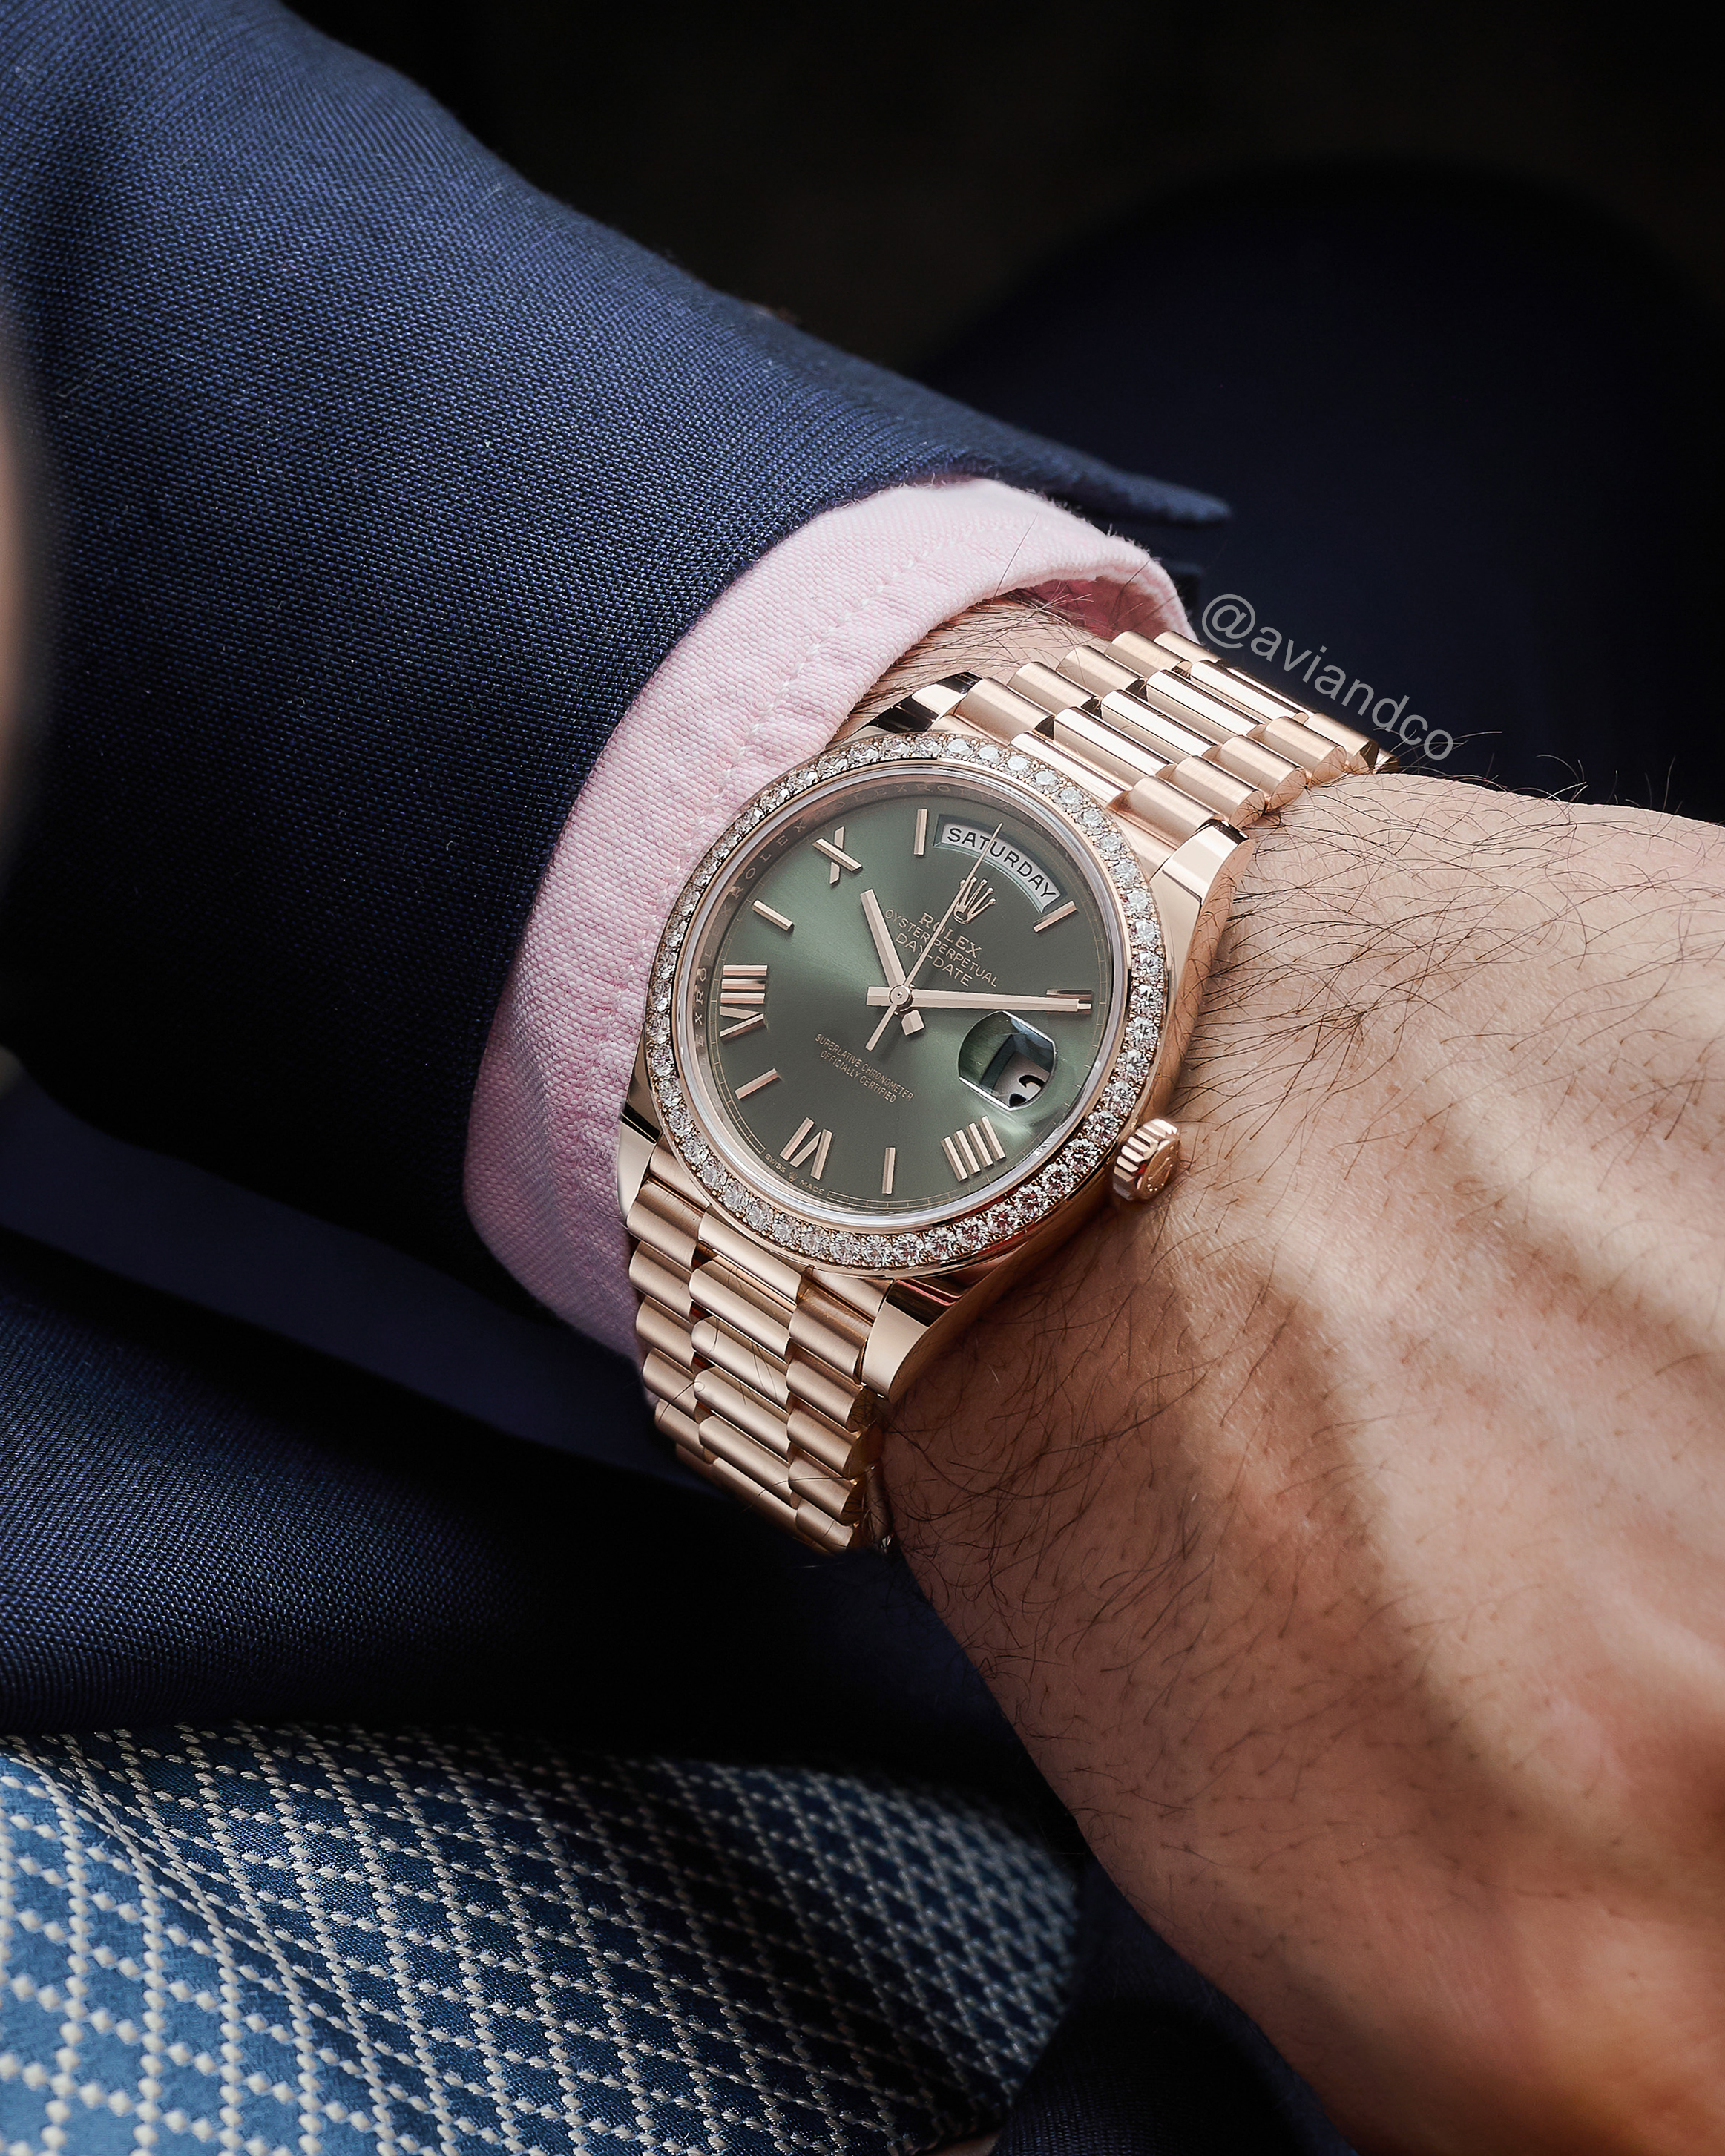 Rolex Day-Date on a Man’s Wrist Wearing a Navy Blue Suit and Pink Button-down